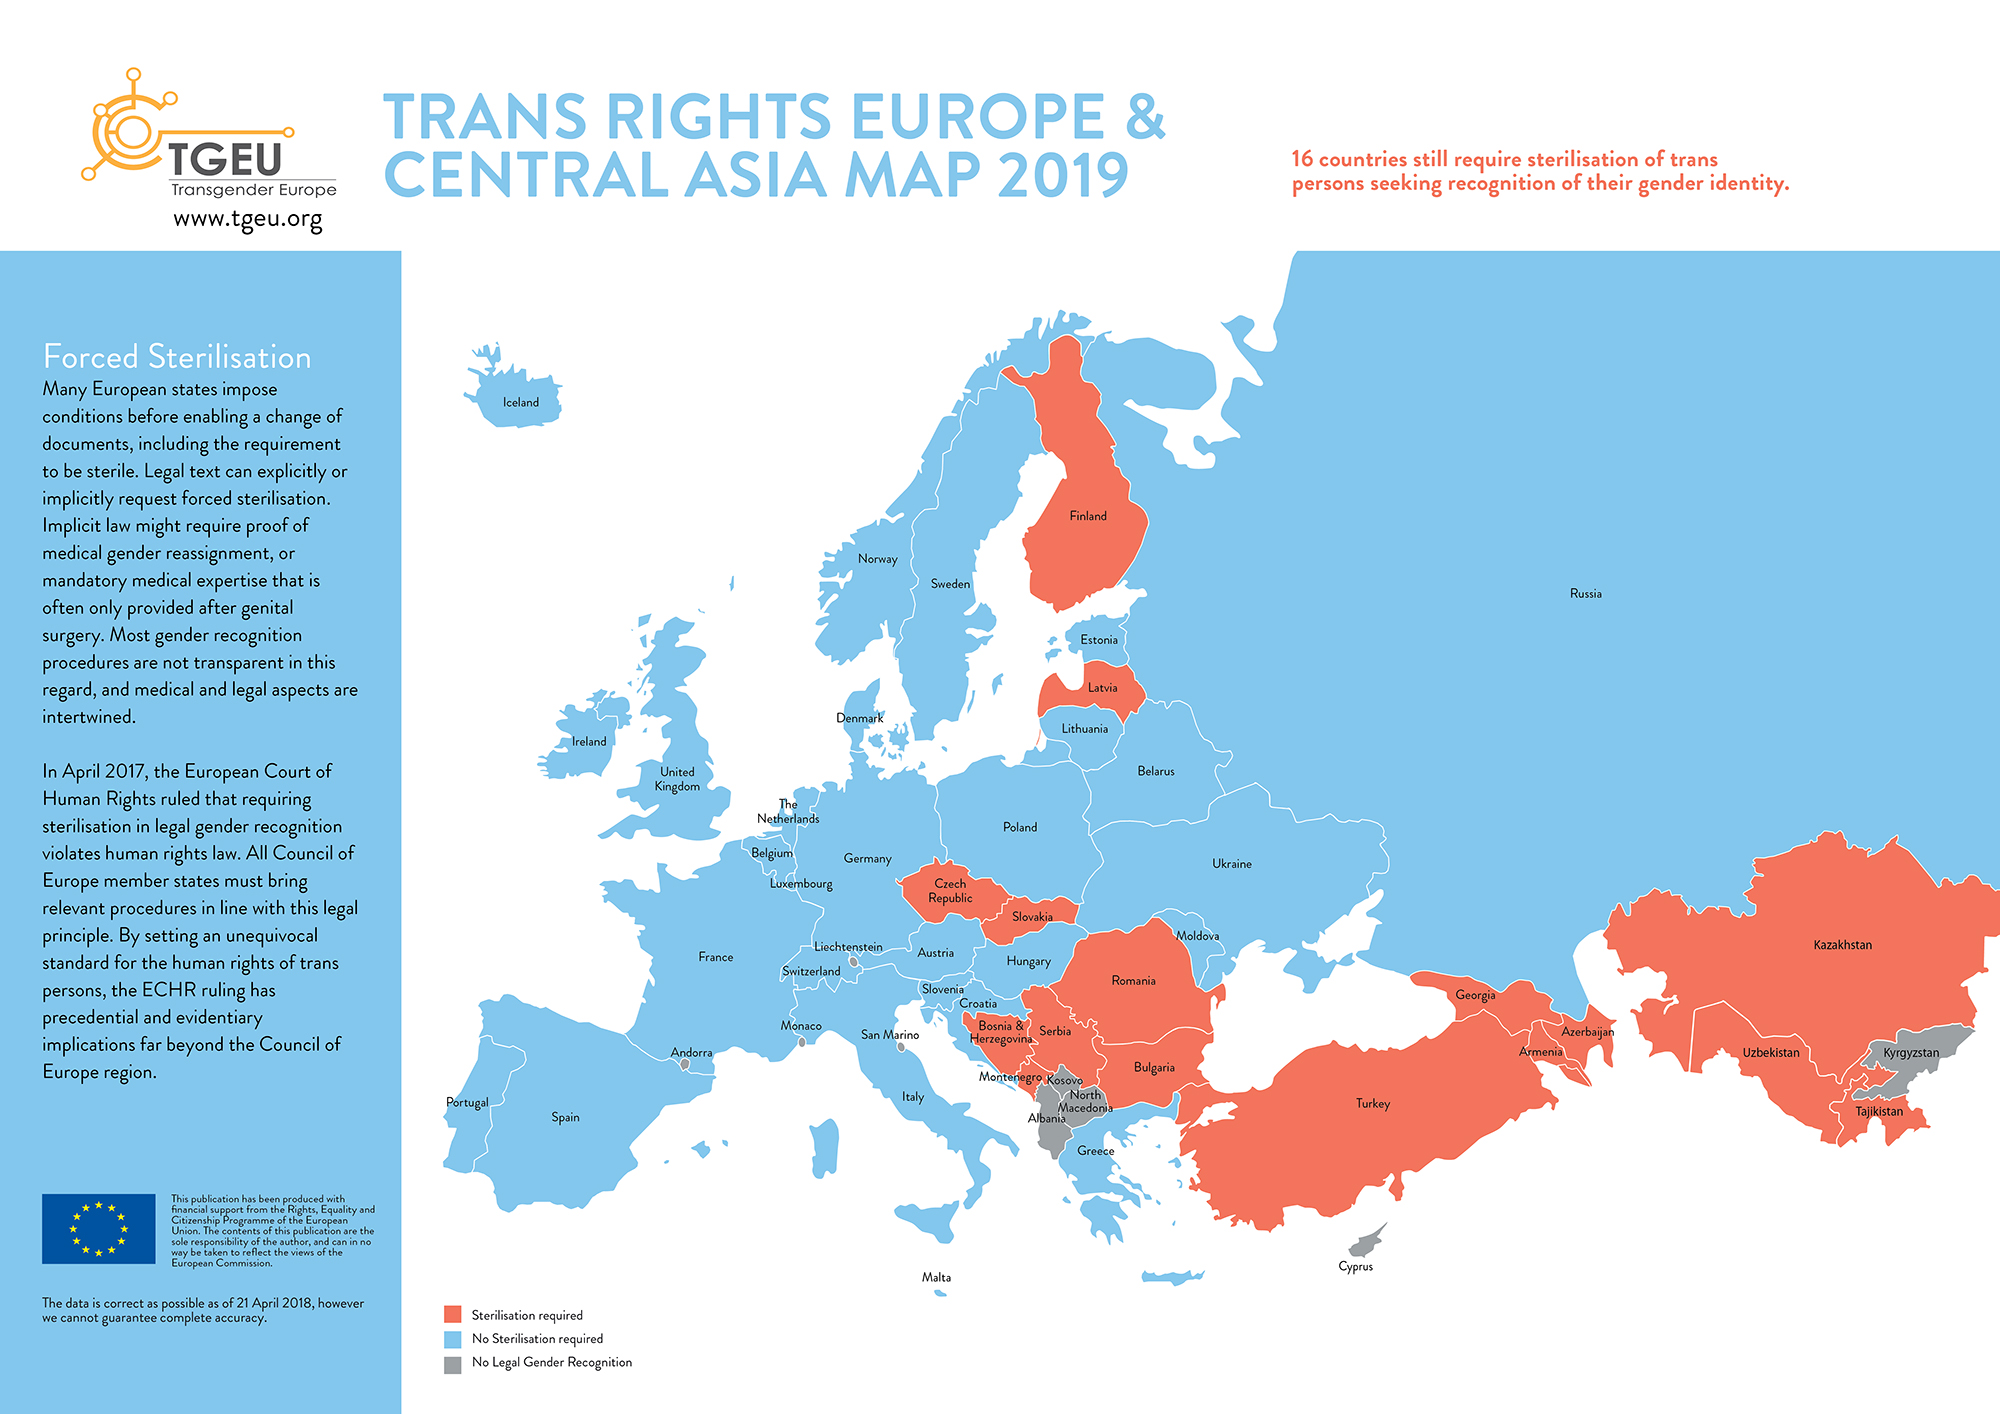 Trans Rights Europe & Central Asia Map - Forced Sterilisation